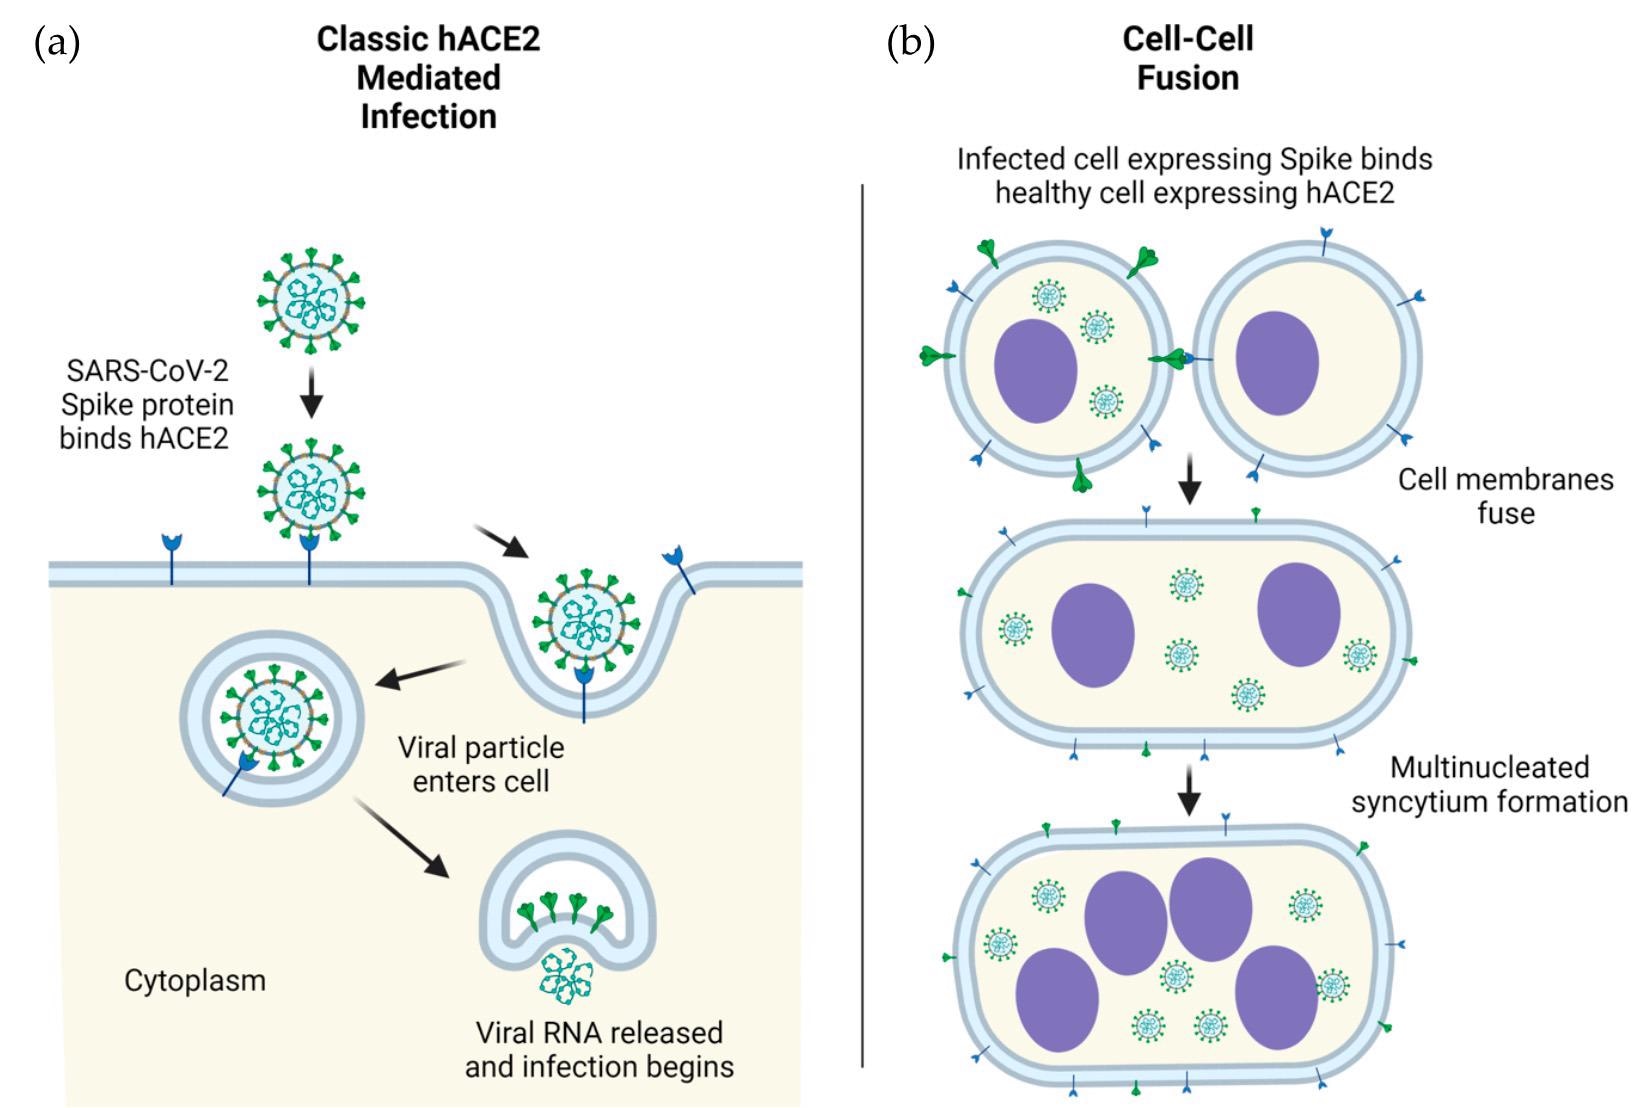 SARS-CoV-2 viral particles into human cells, mediated by ACE2. (b) Cellular infection by ACE2- spike mediated cell-cell fusion. Infection in human (h) cells is used as an example. Figure 1. ACE2-mediated cellular infection by SARS-CoV-2. (a) Schematic of direct cellular entry of SARS-CoV-2 viral particles into human cells, mediated by ACE2. (b) Cellular infection by ACE2-spike mediated cell-cell fusion. Infection in human (h) cells is used as an example.